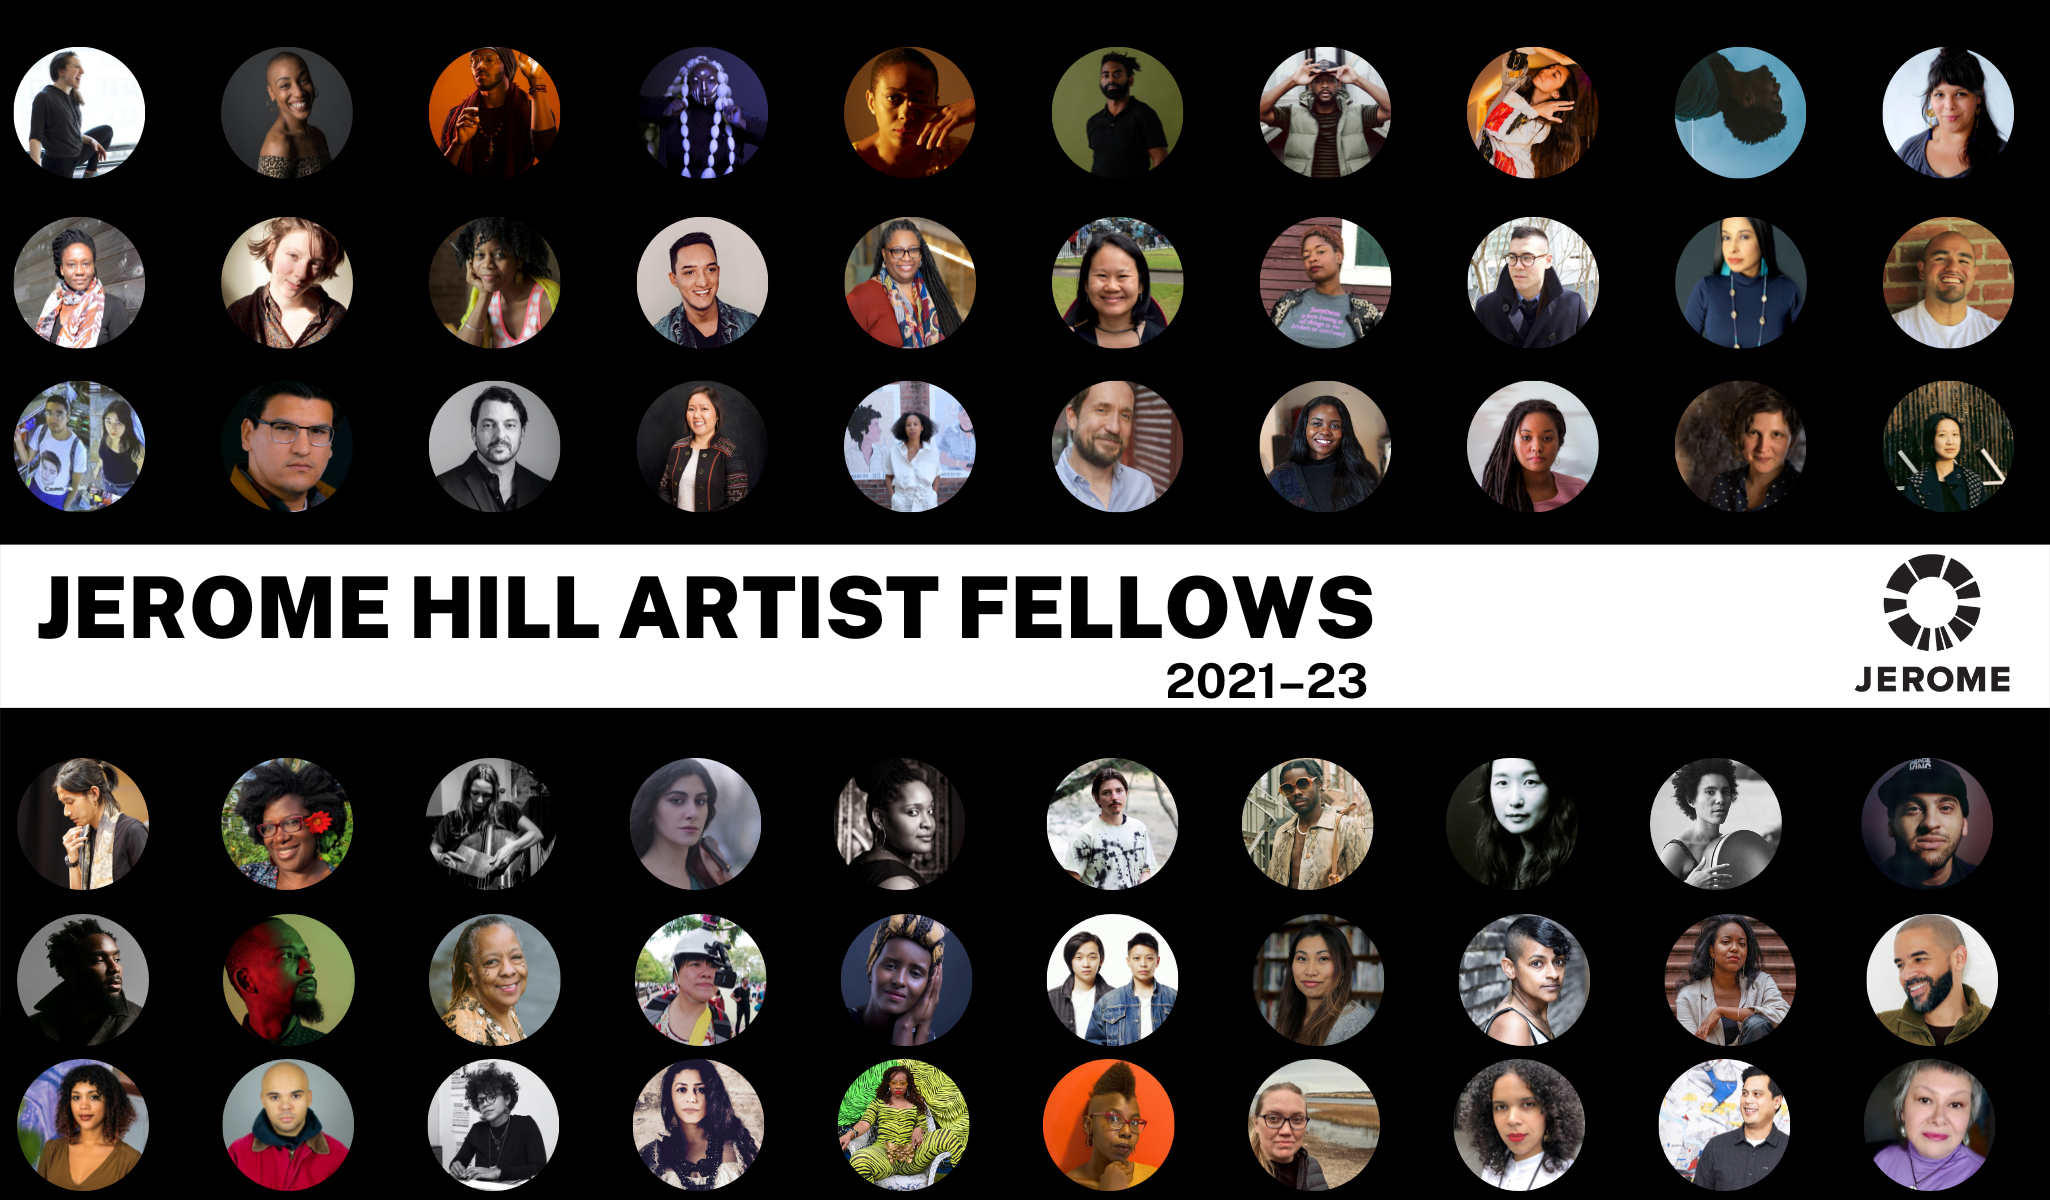 Banner image featuring pictures of all Jerome Hill Artist Fellows for 2021-23